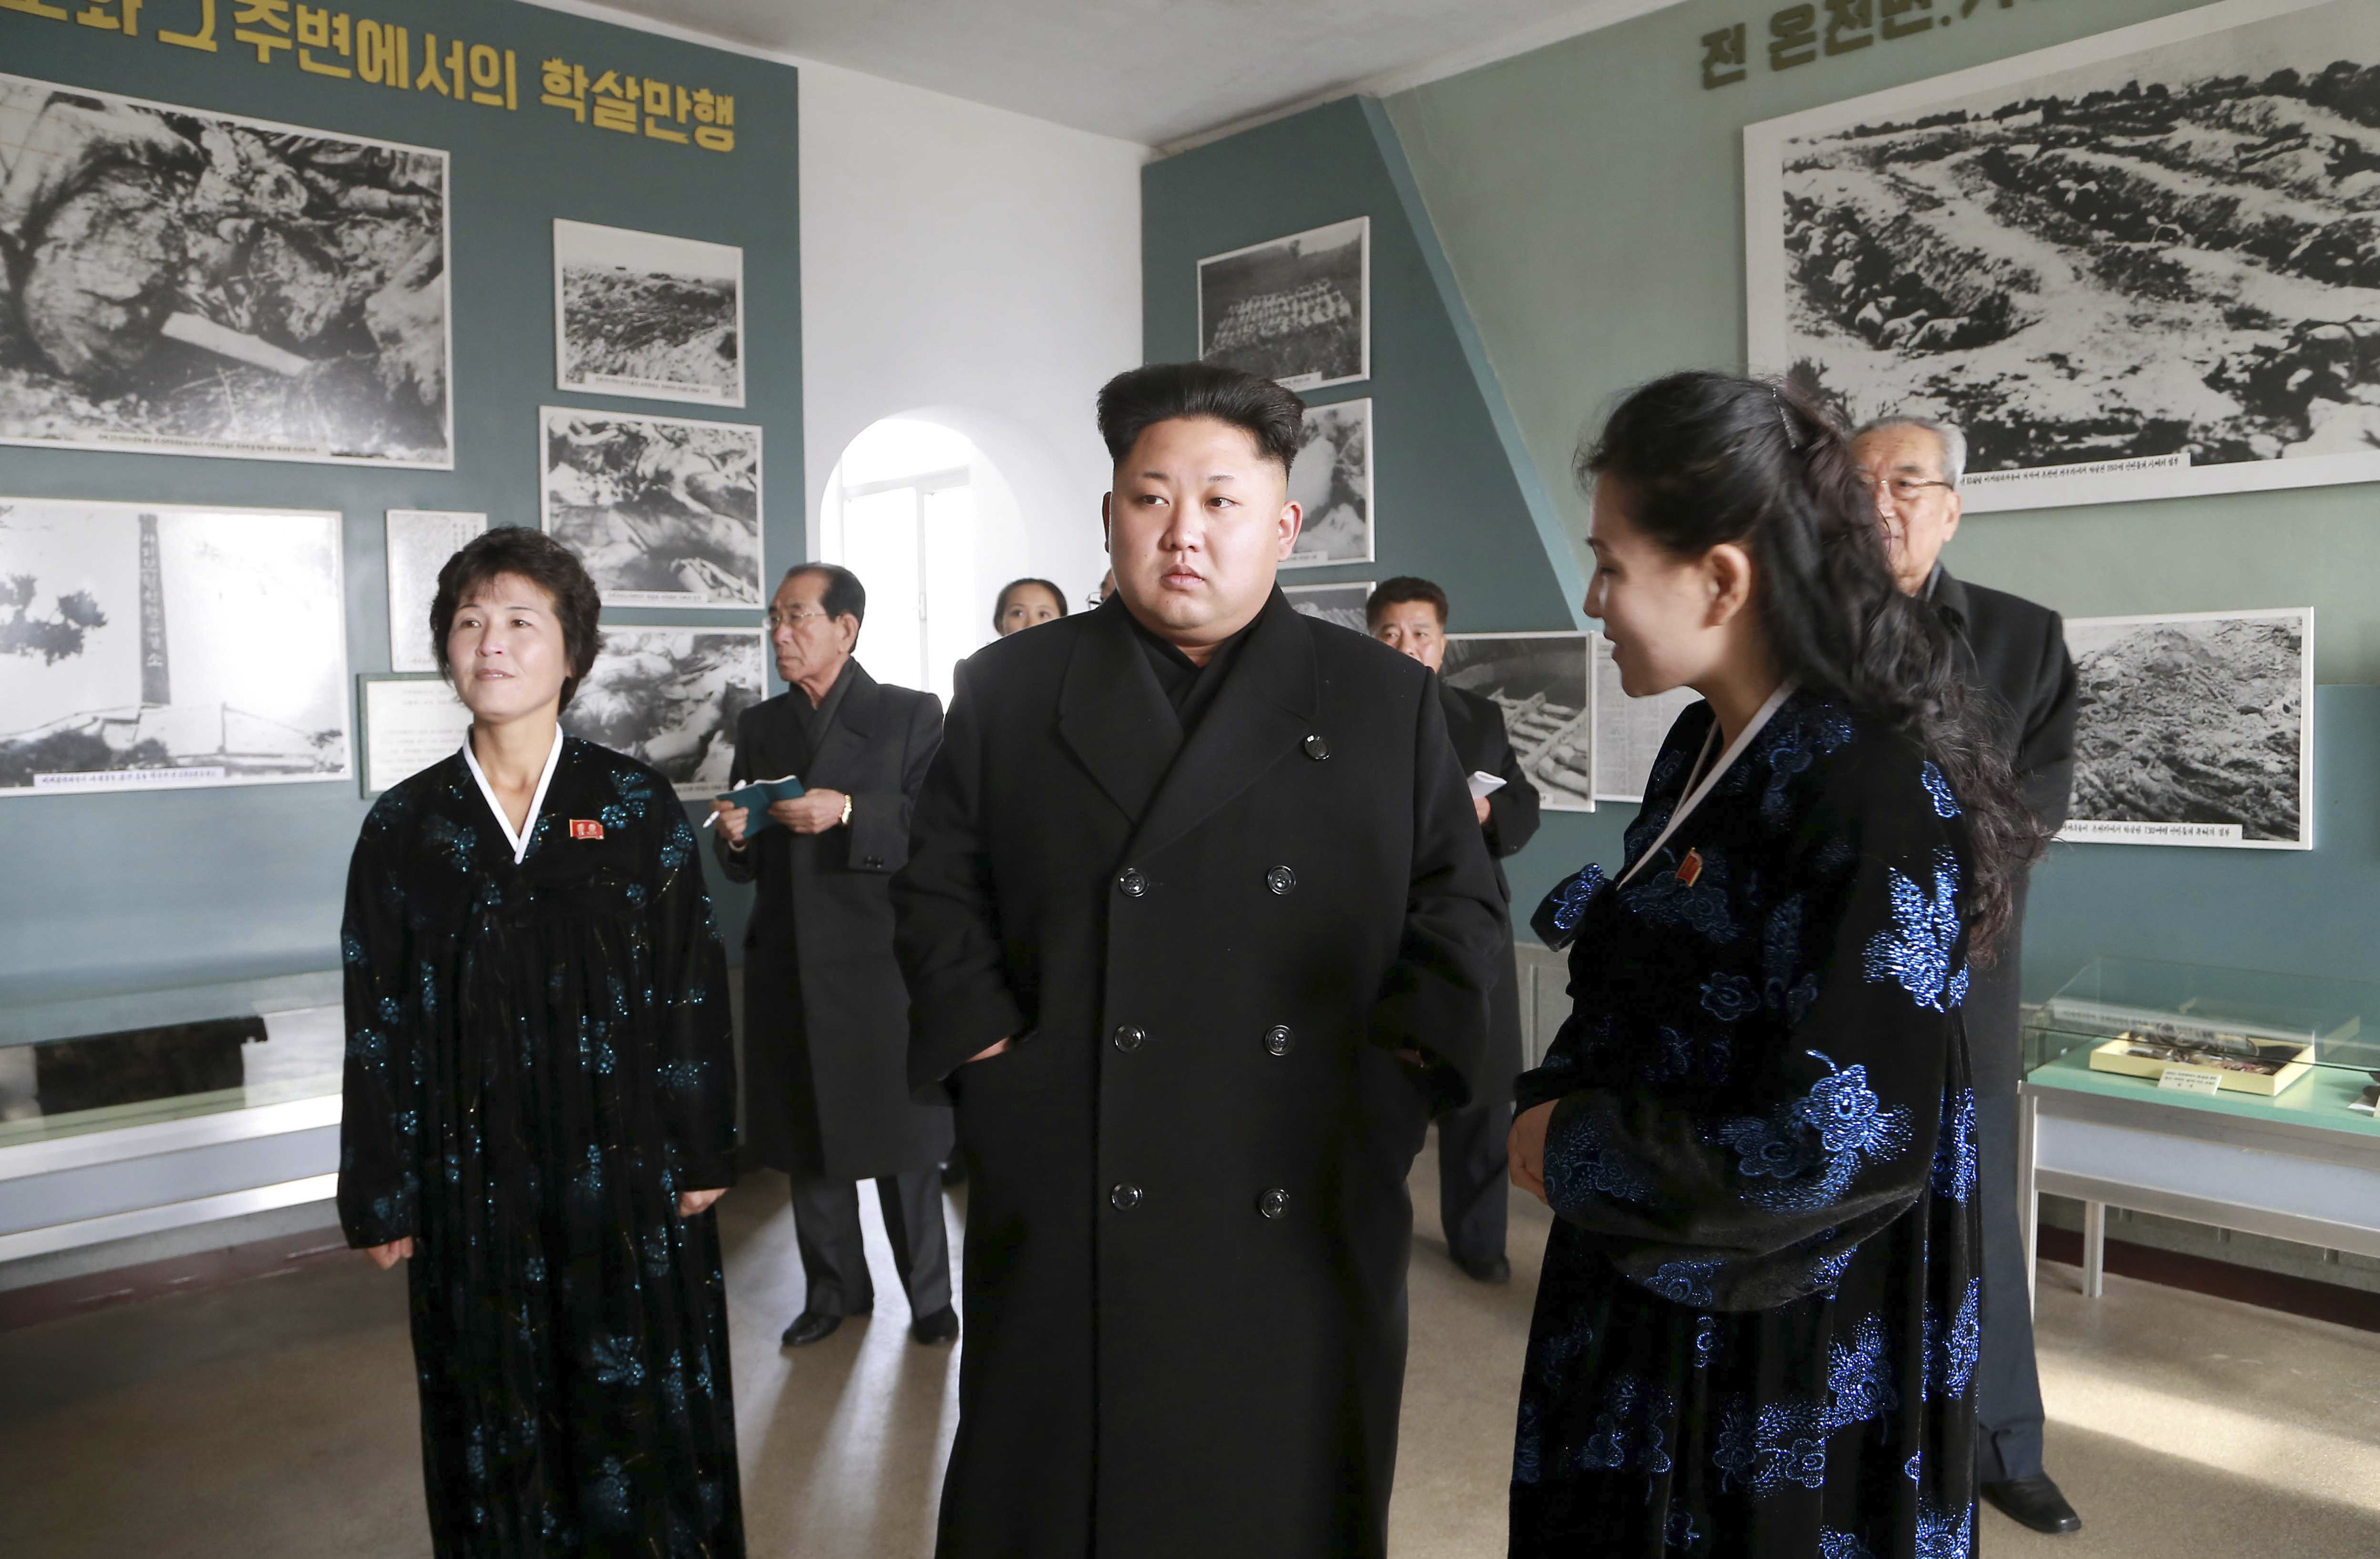 North Korean leader Kim Jong Un gives field guidance to the Sinchon Museum in Pyongyang in this undated photo released by the state-run Korean Central News Agency on Nov. 25, 2014 (KCNA/Reuters)